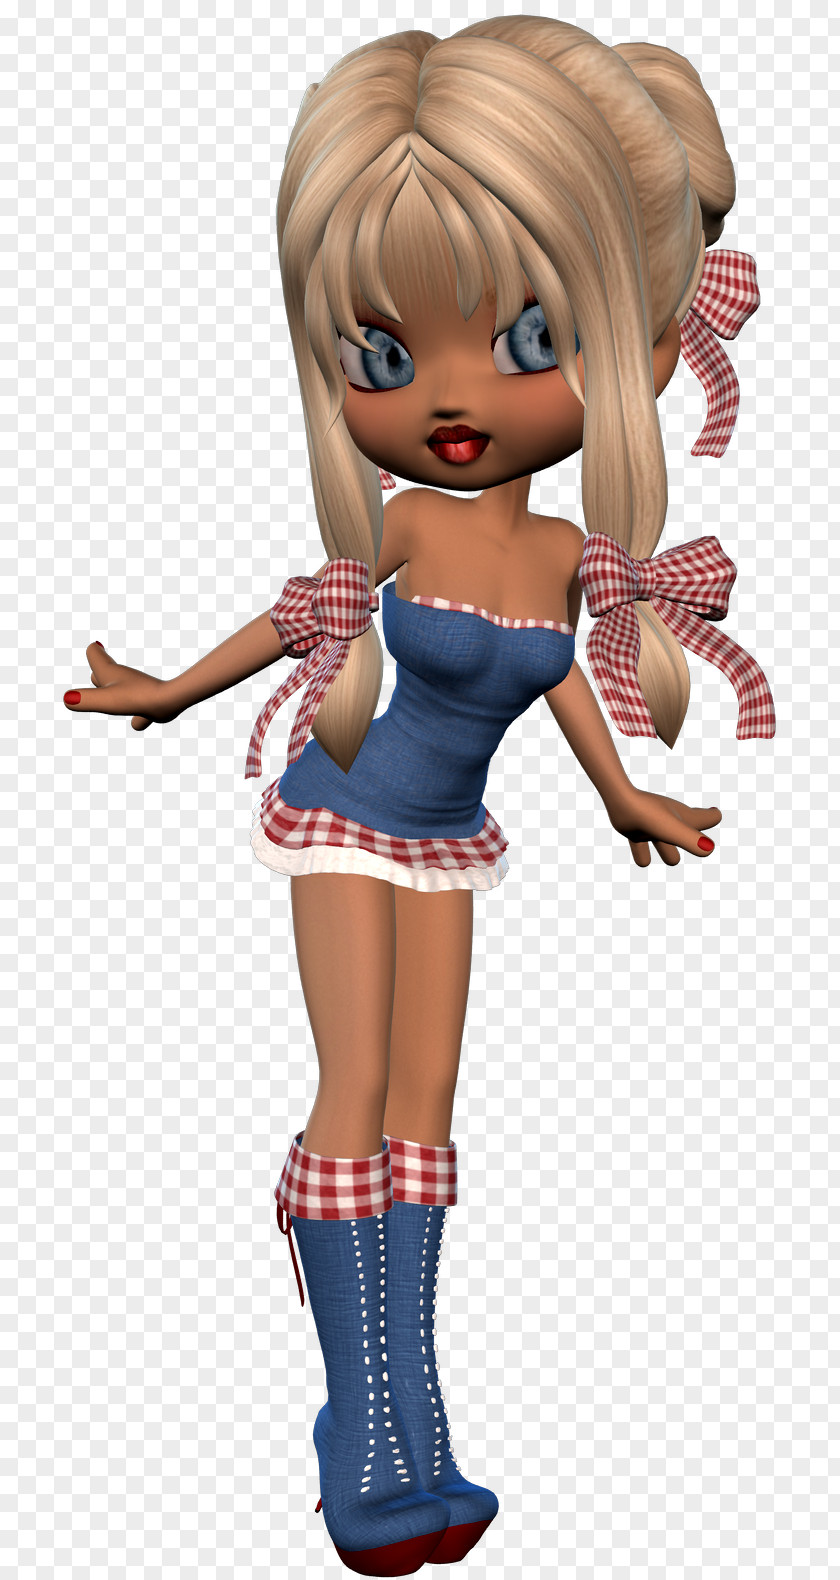 Doll Biscuits PNG